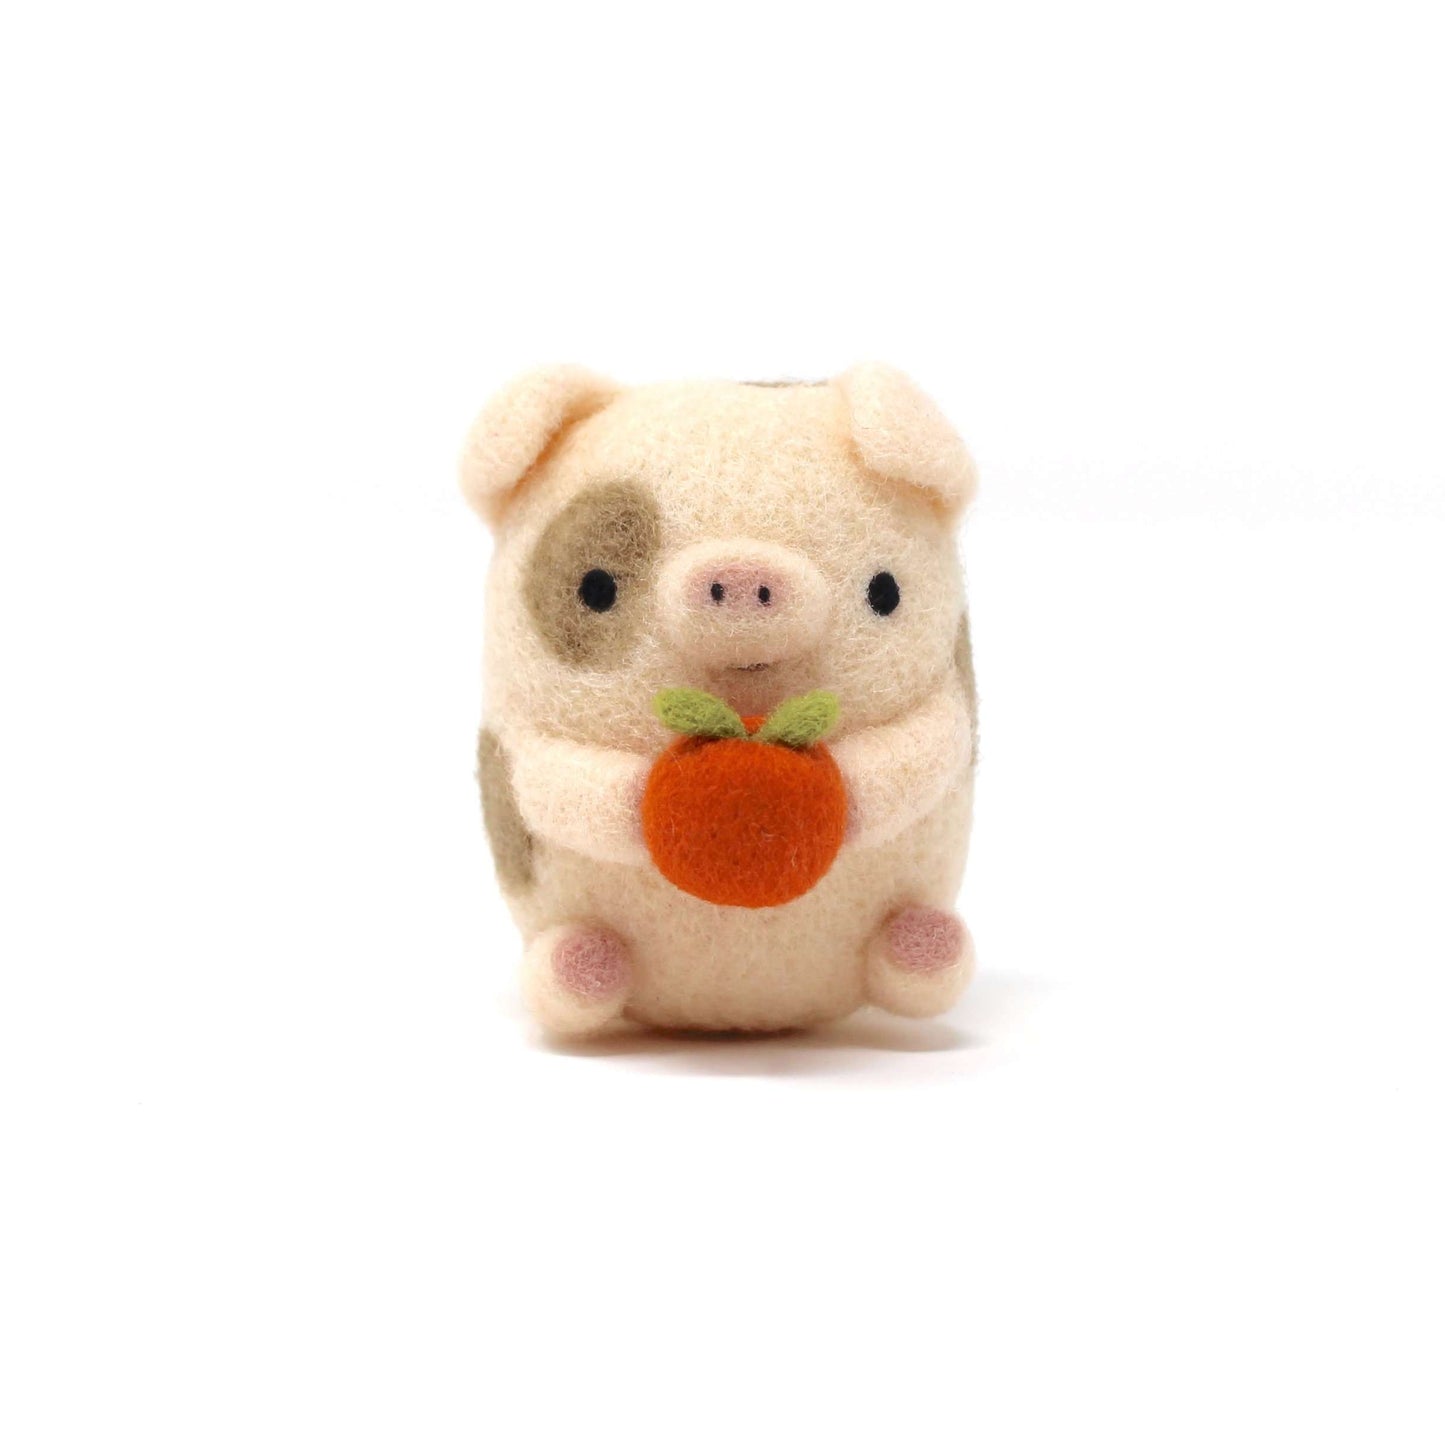 Needle Felted Spotted Pig with Orange by Wild Whimsy Woolies